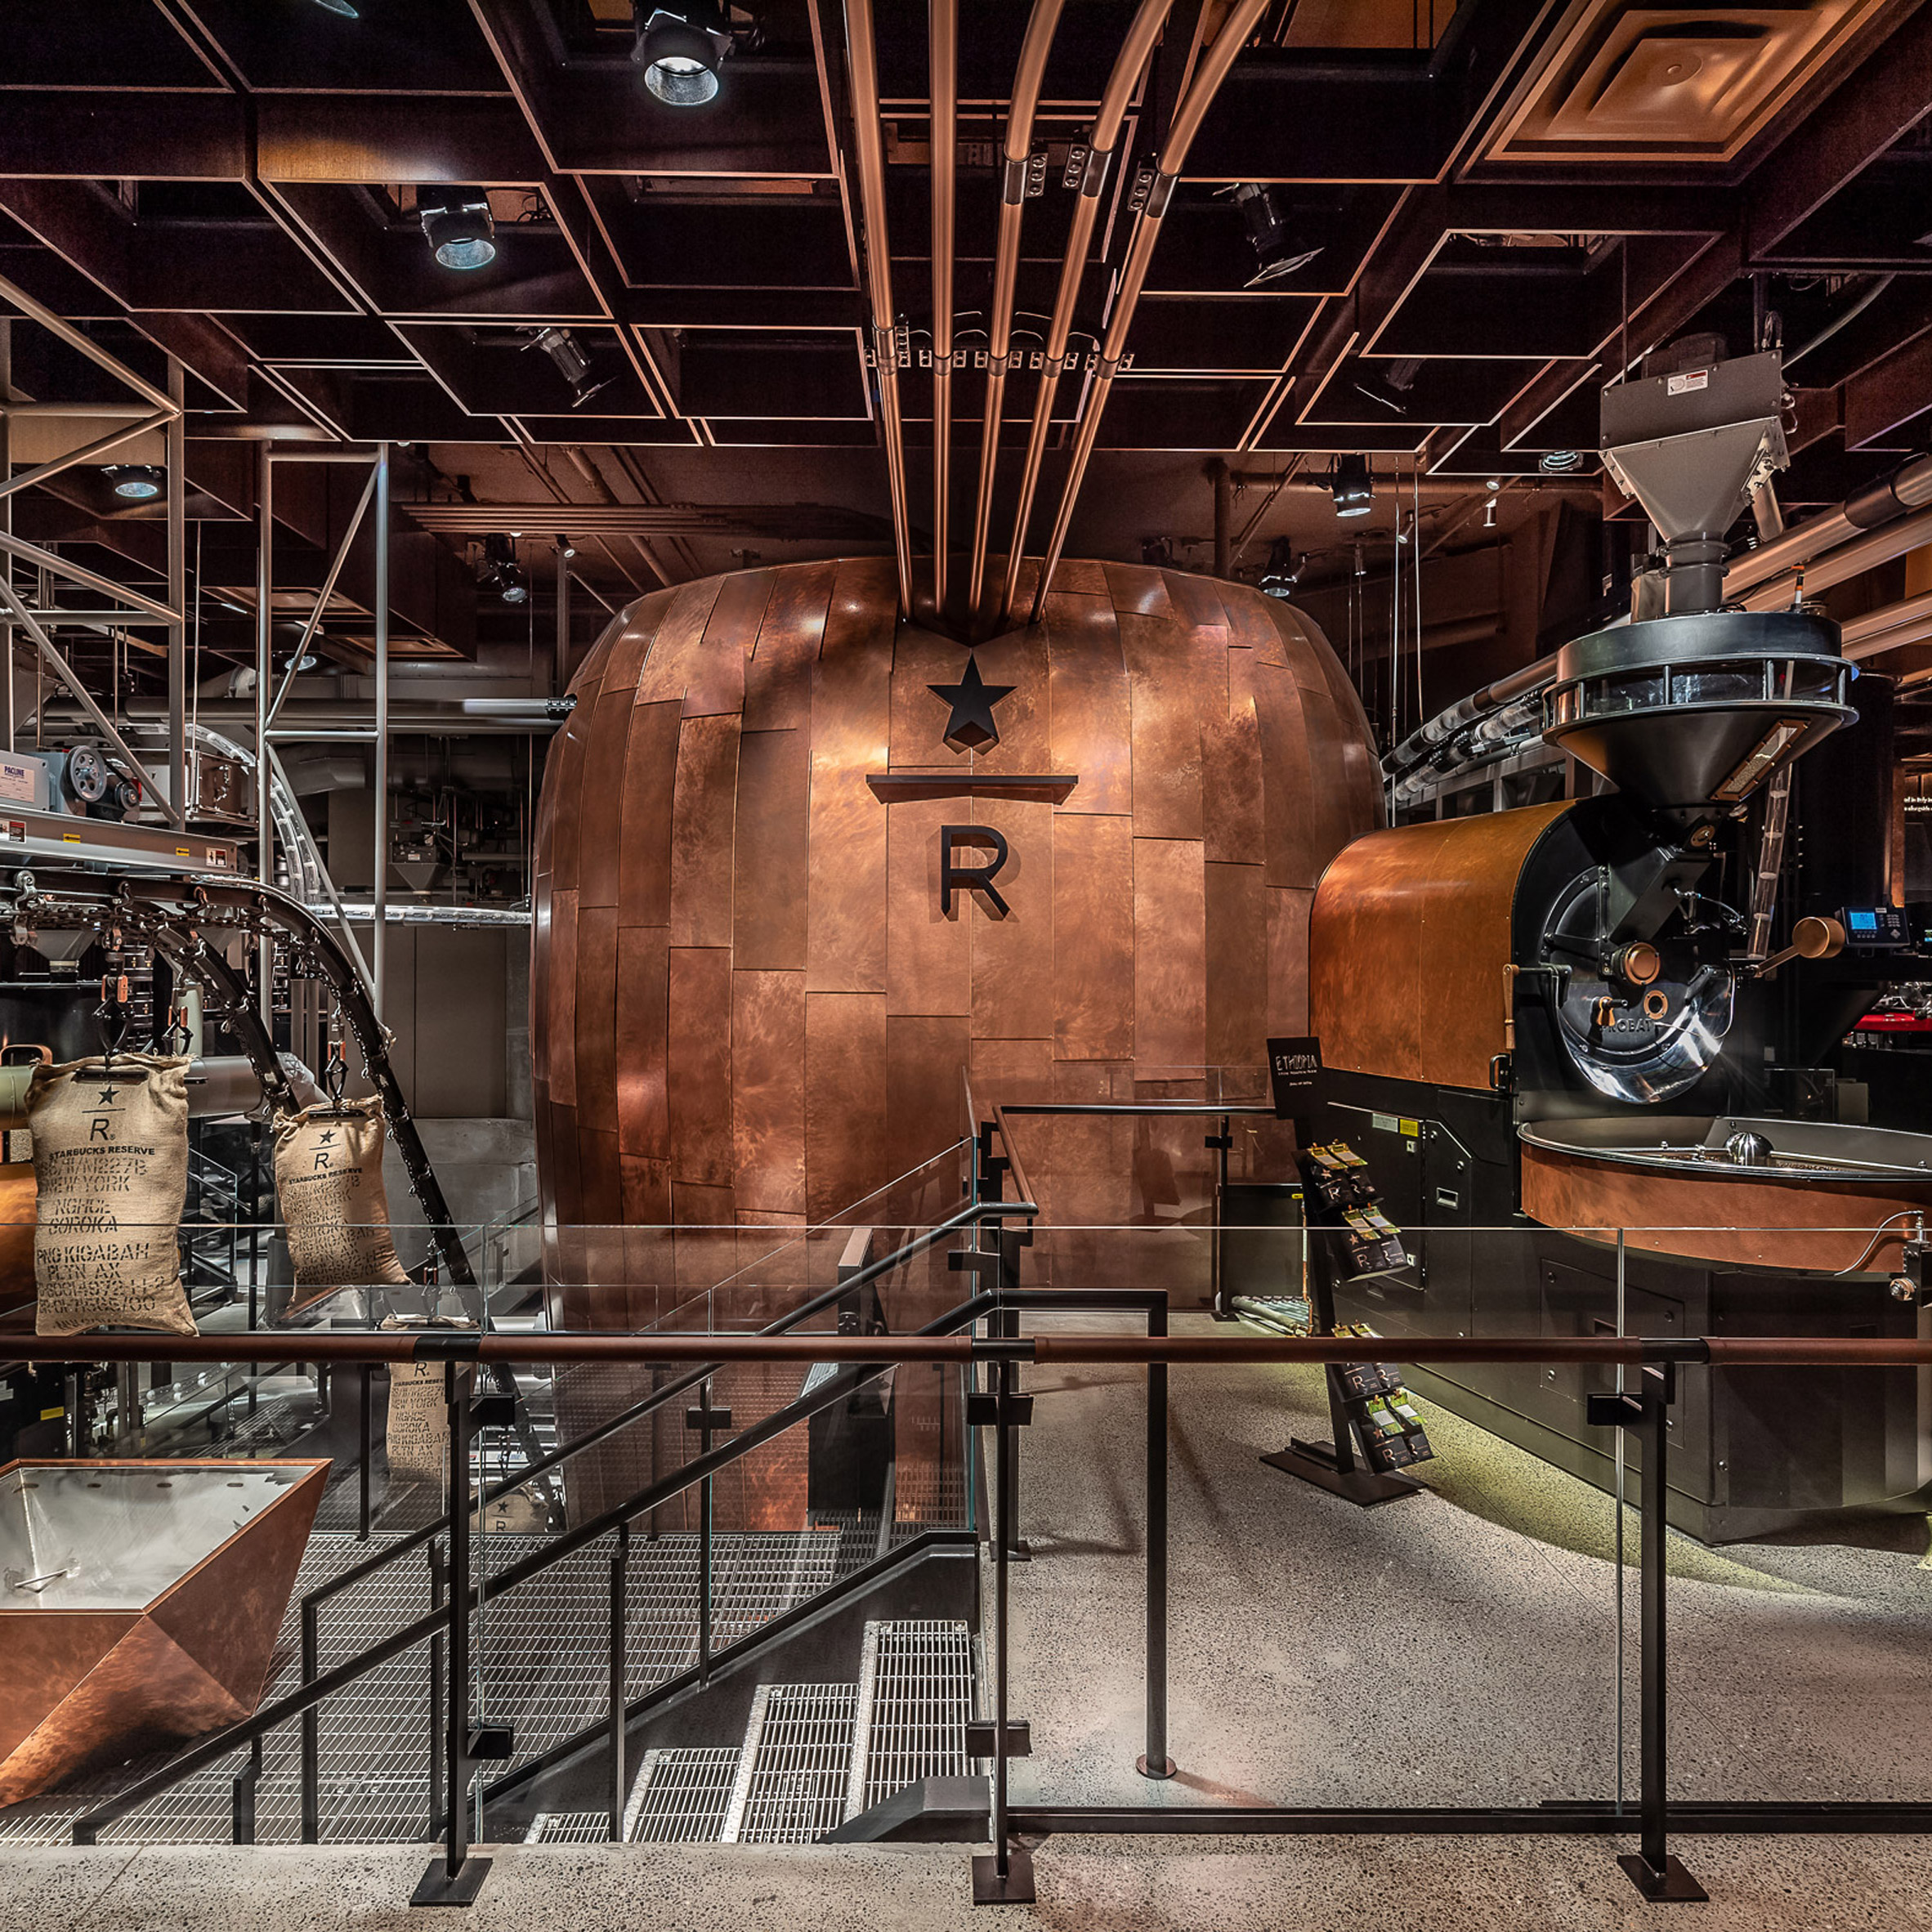 Starbucks Reserve Roastery Cafe Opens In New Yorks Meatpacking Newh